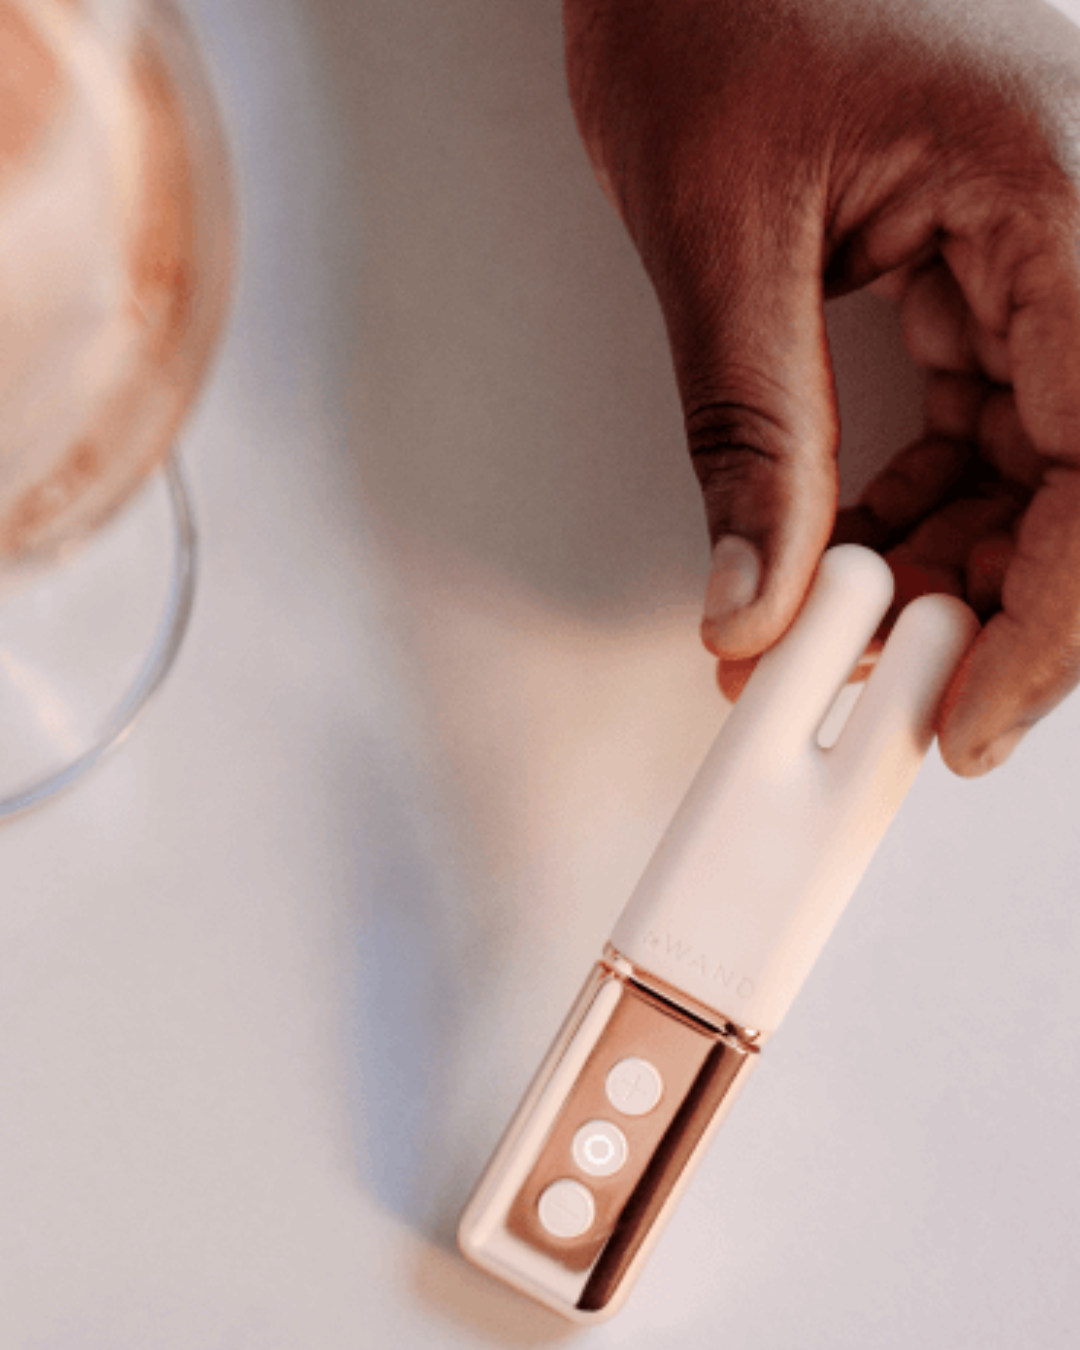 Le Wand Deux Twin Motor Rechargeable Waterproof Vibrator - Rose Gold held in a hand 